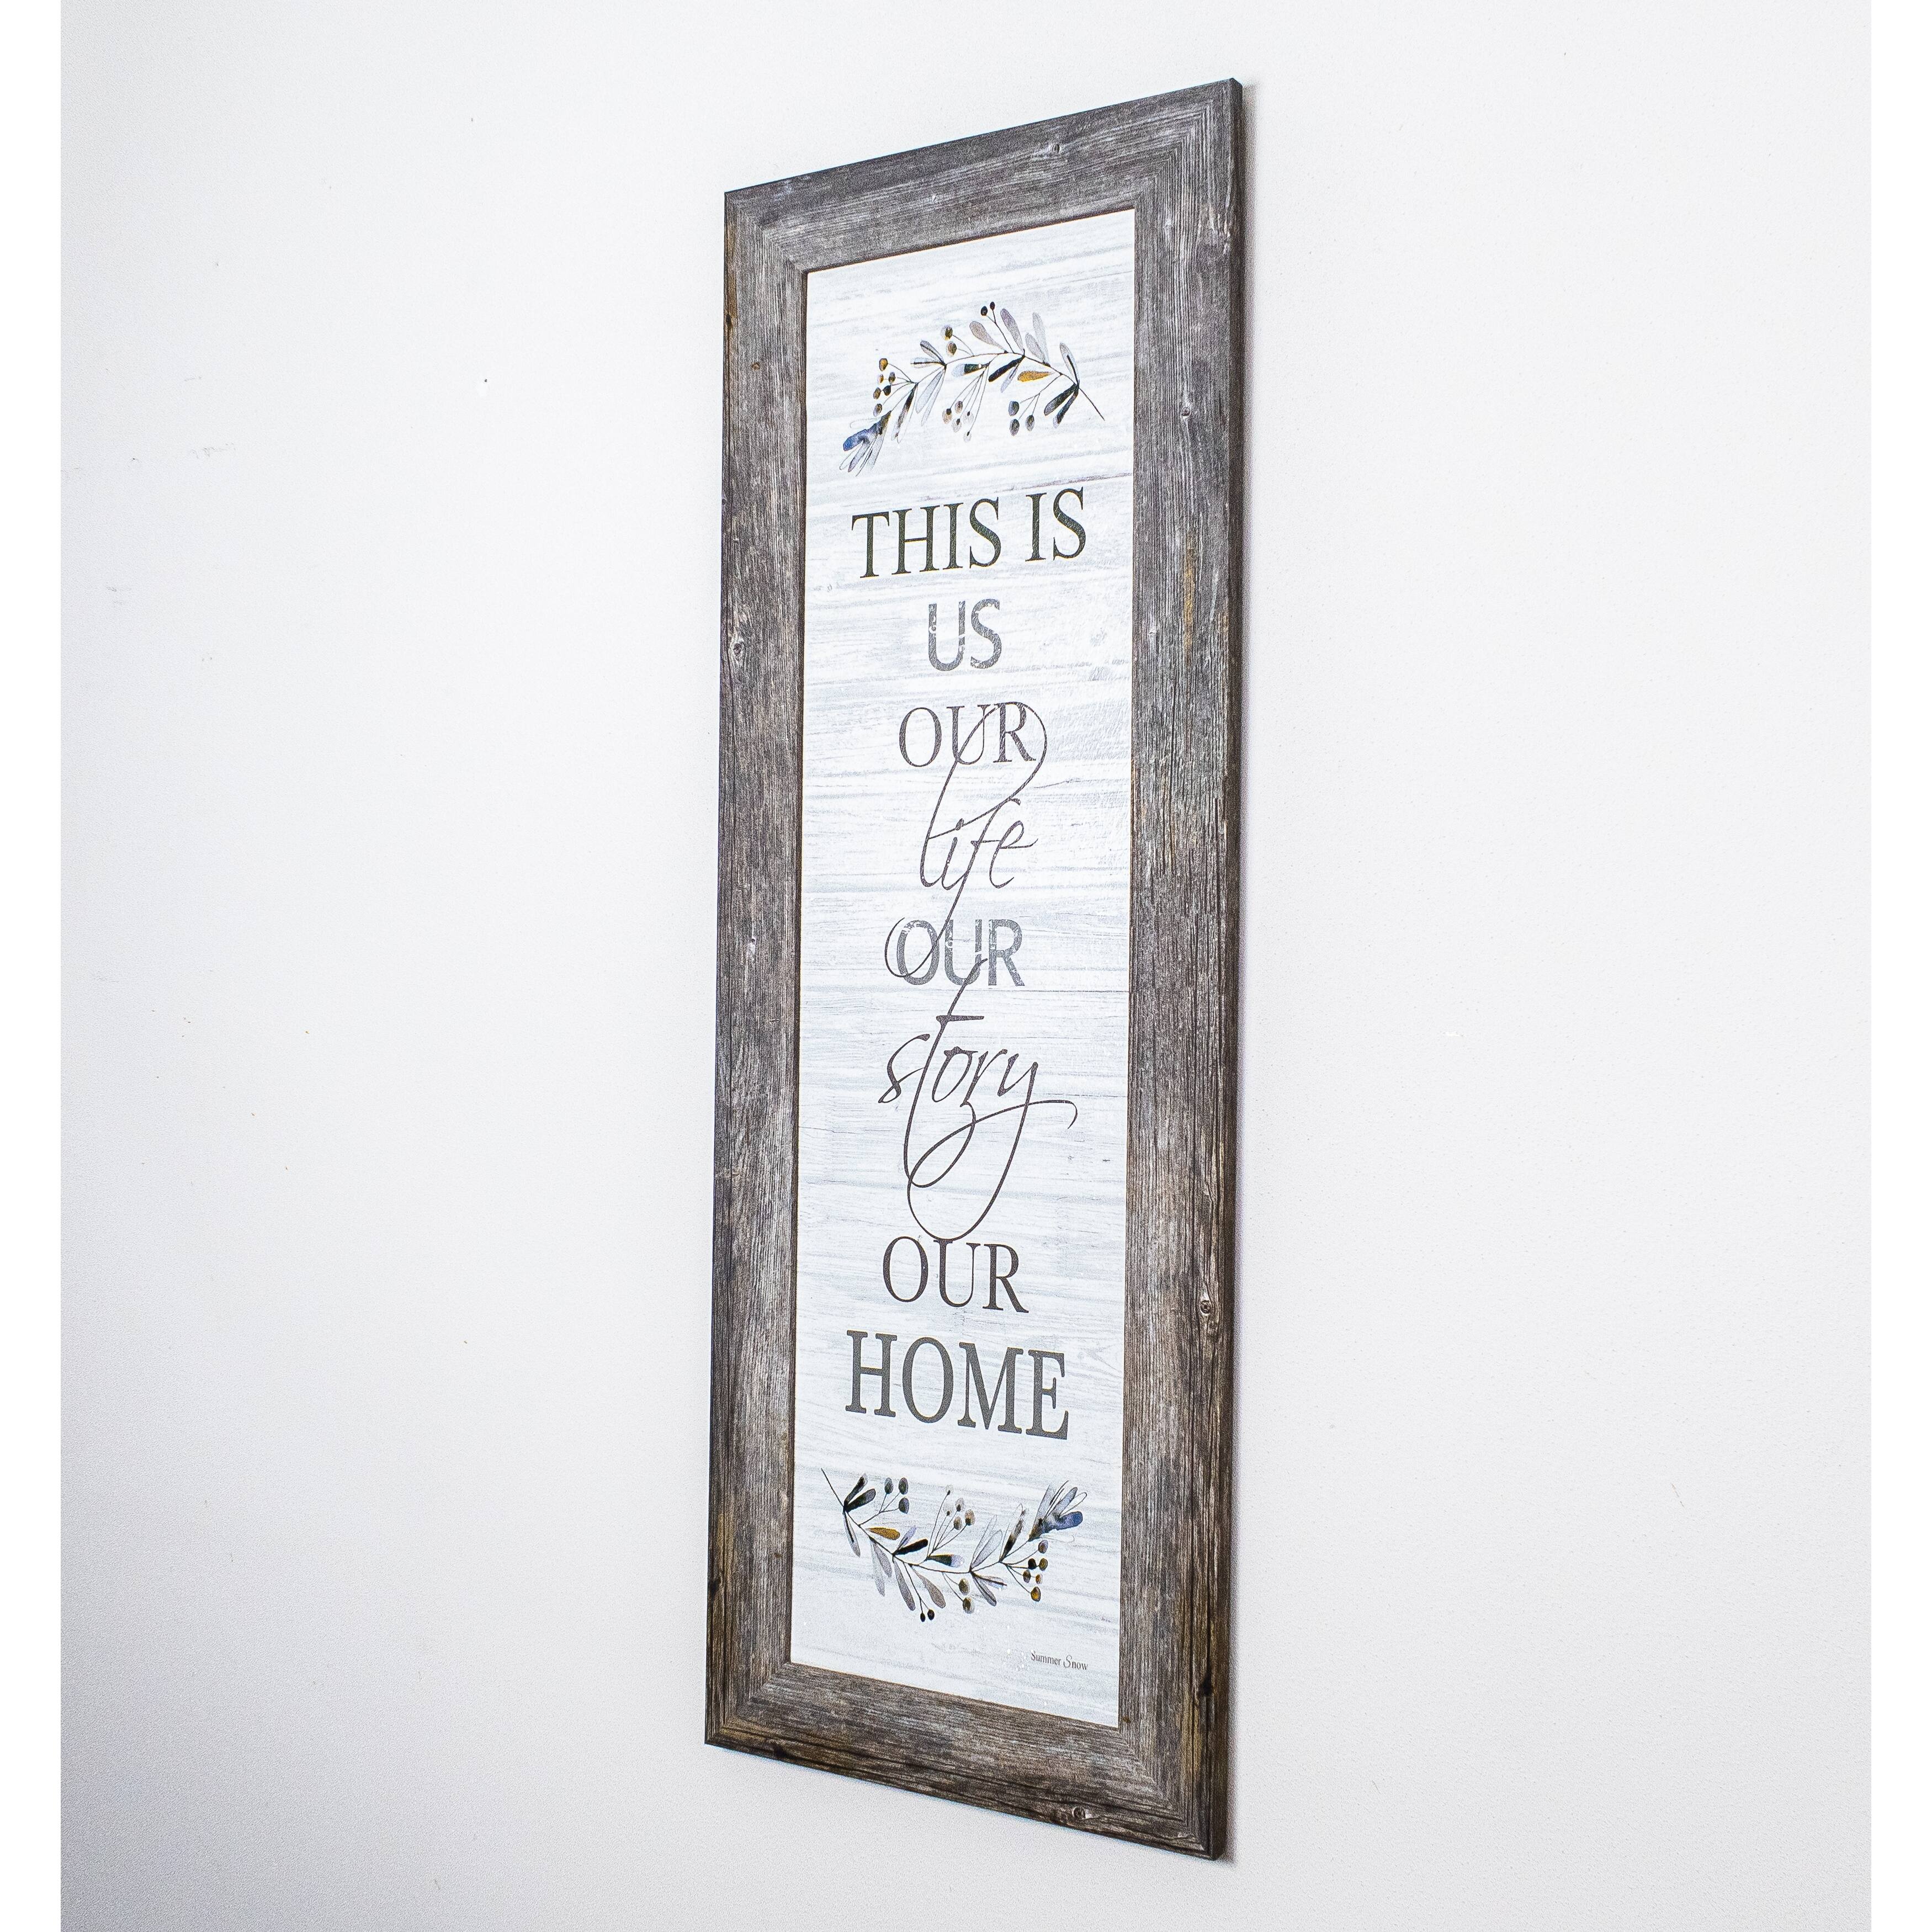 This Is Us Our Life Our Story Our Home Family Gift Decor Vertical